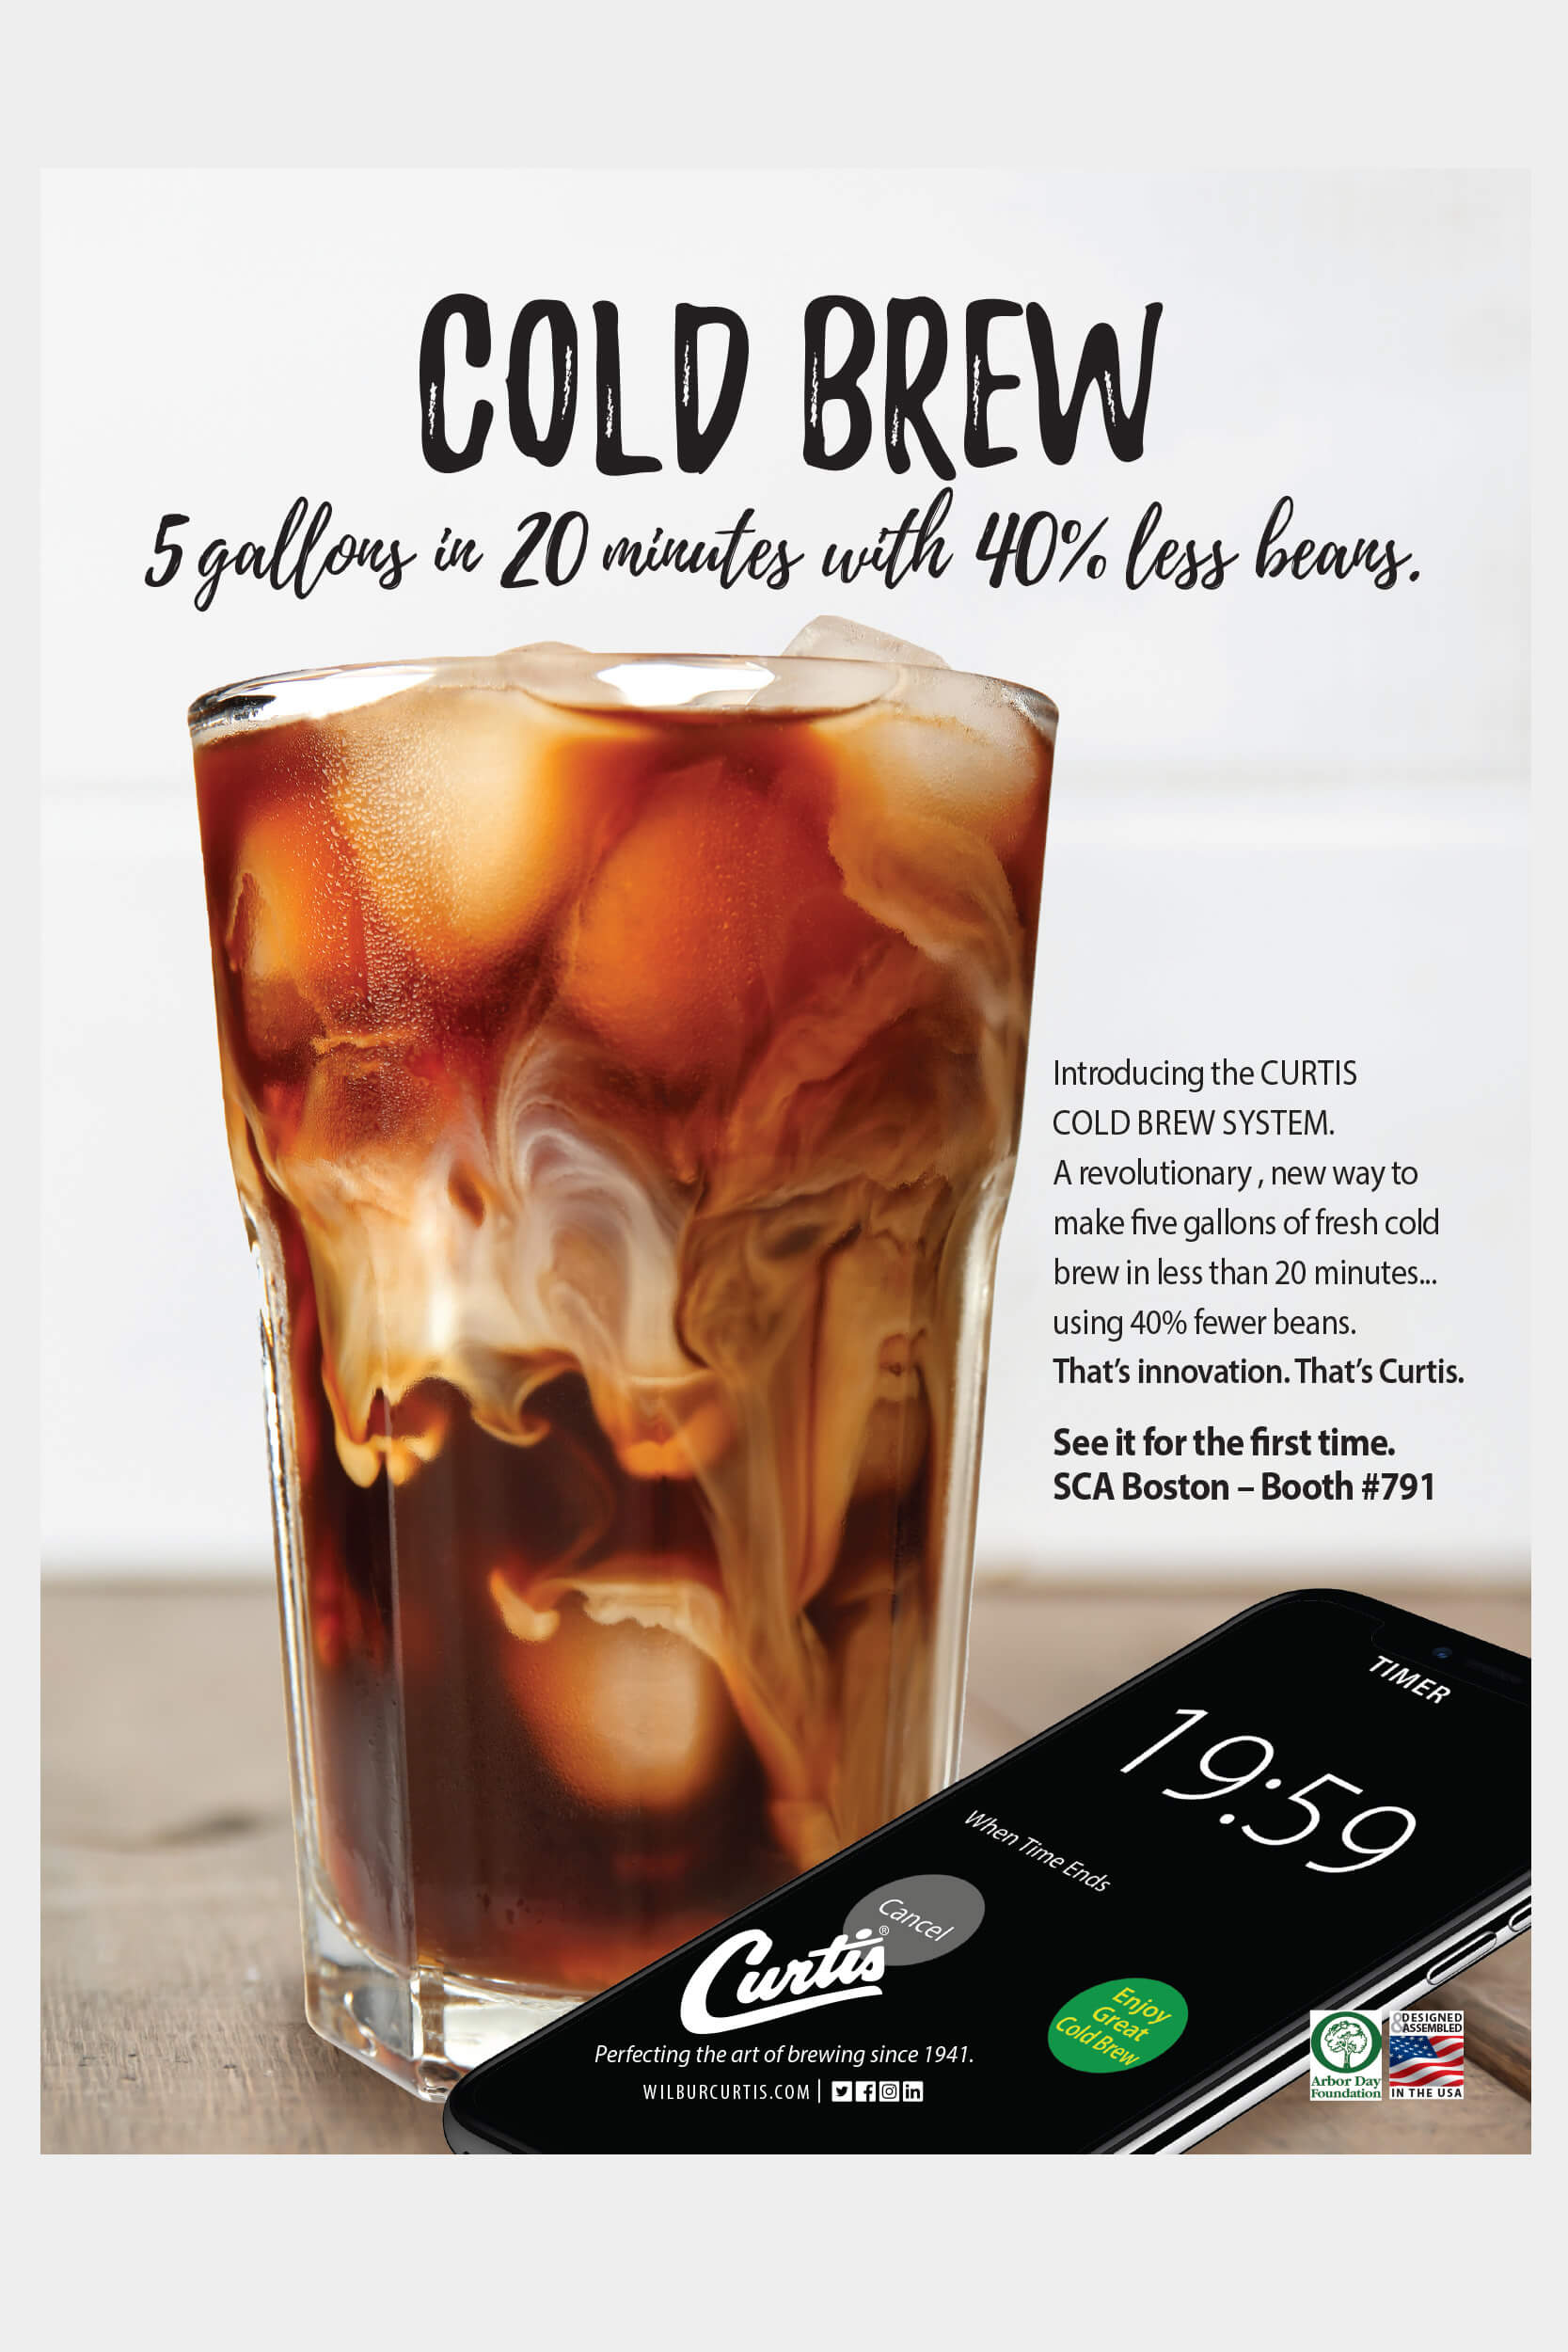 Curtis Cold Brew